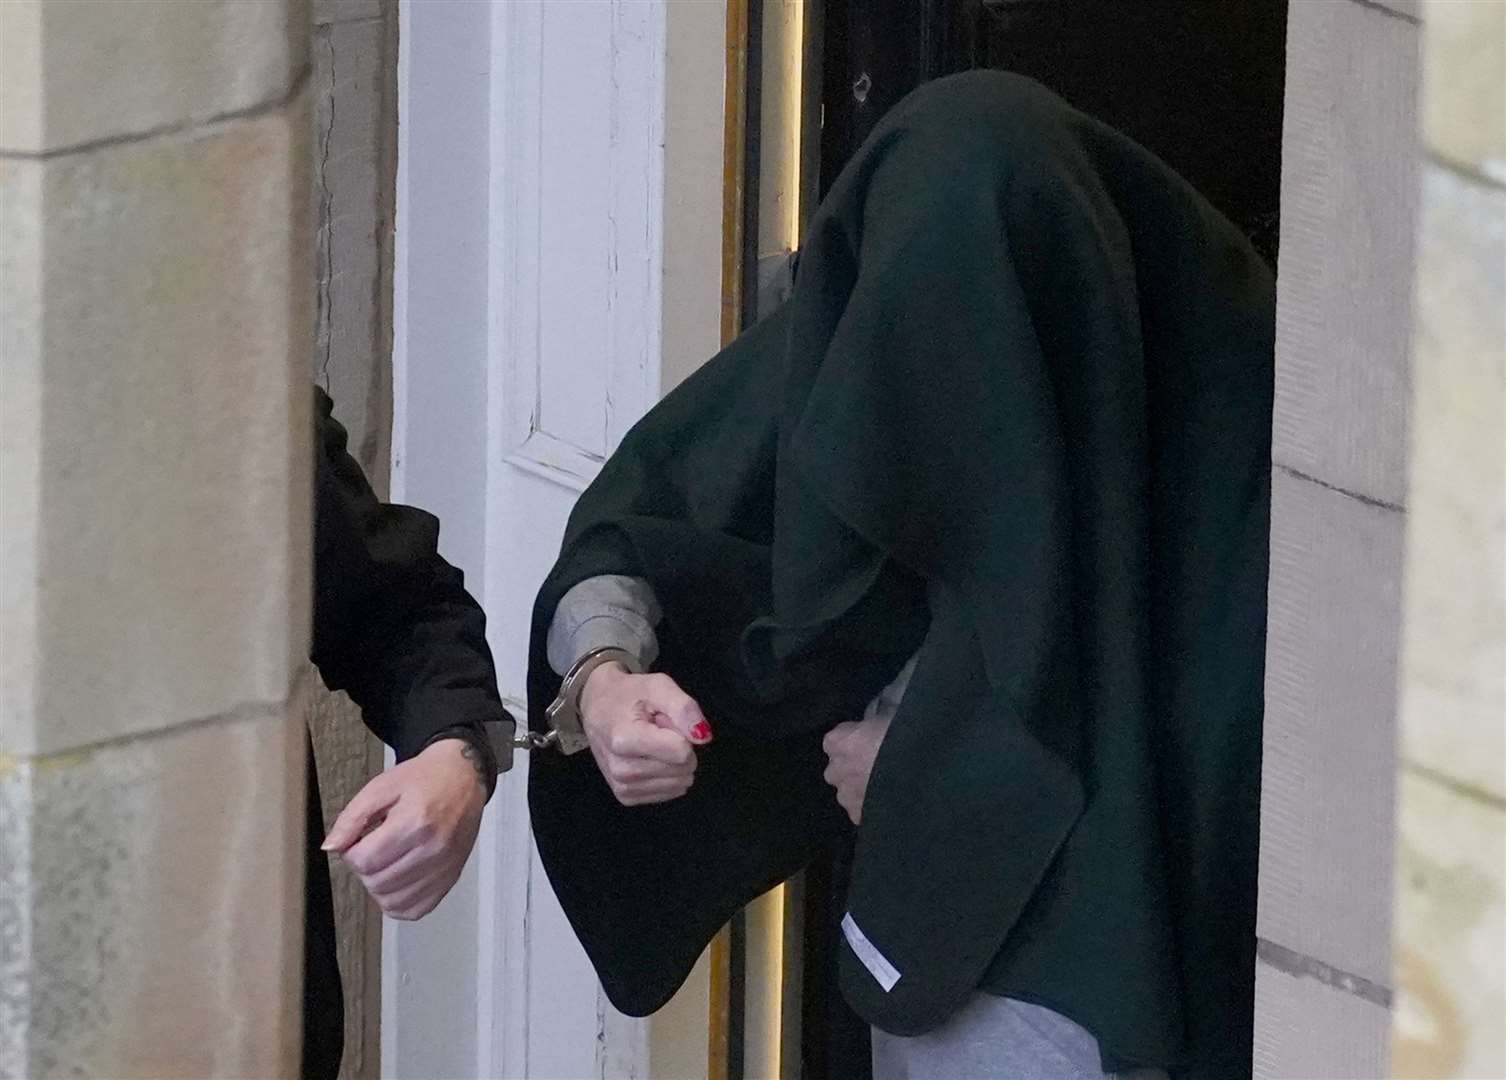 Andrew Miller, with his head covered, is appealing against his sentence (PA)